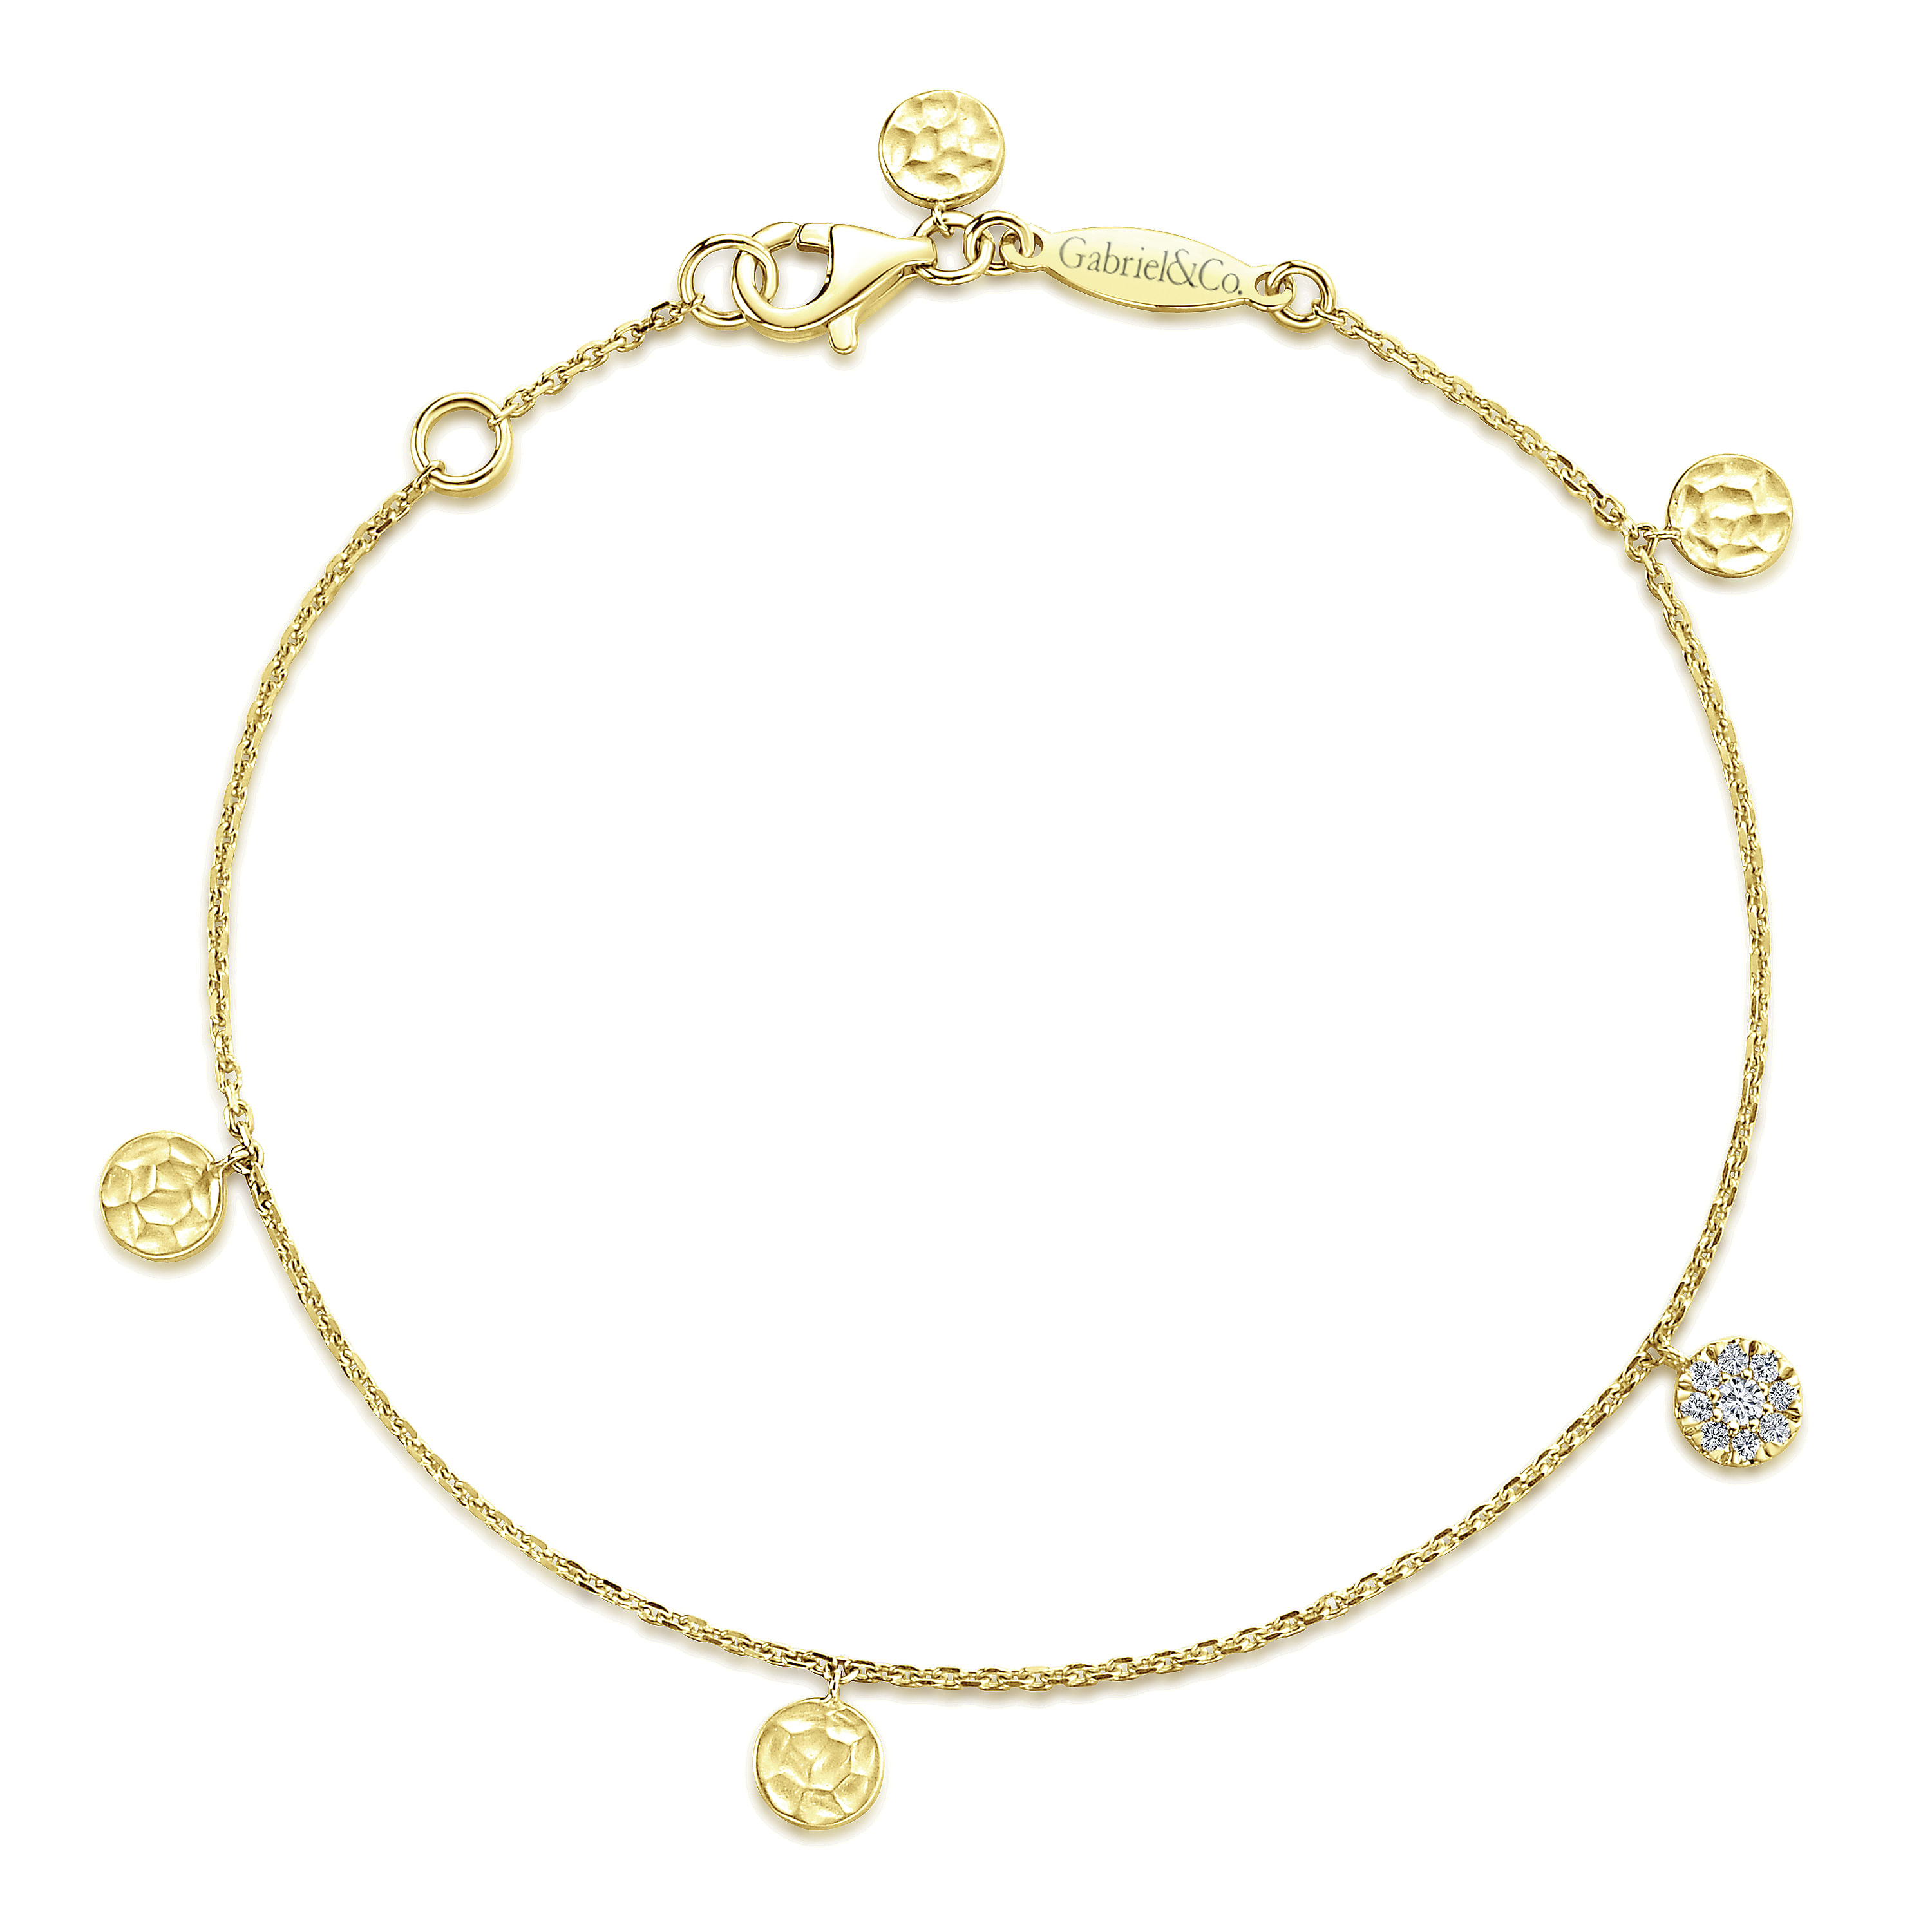 14K Yellow Gold Chain Bracelet with Hammered and Pavé Diamond Discs